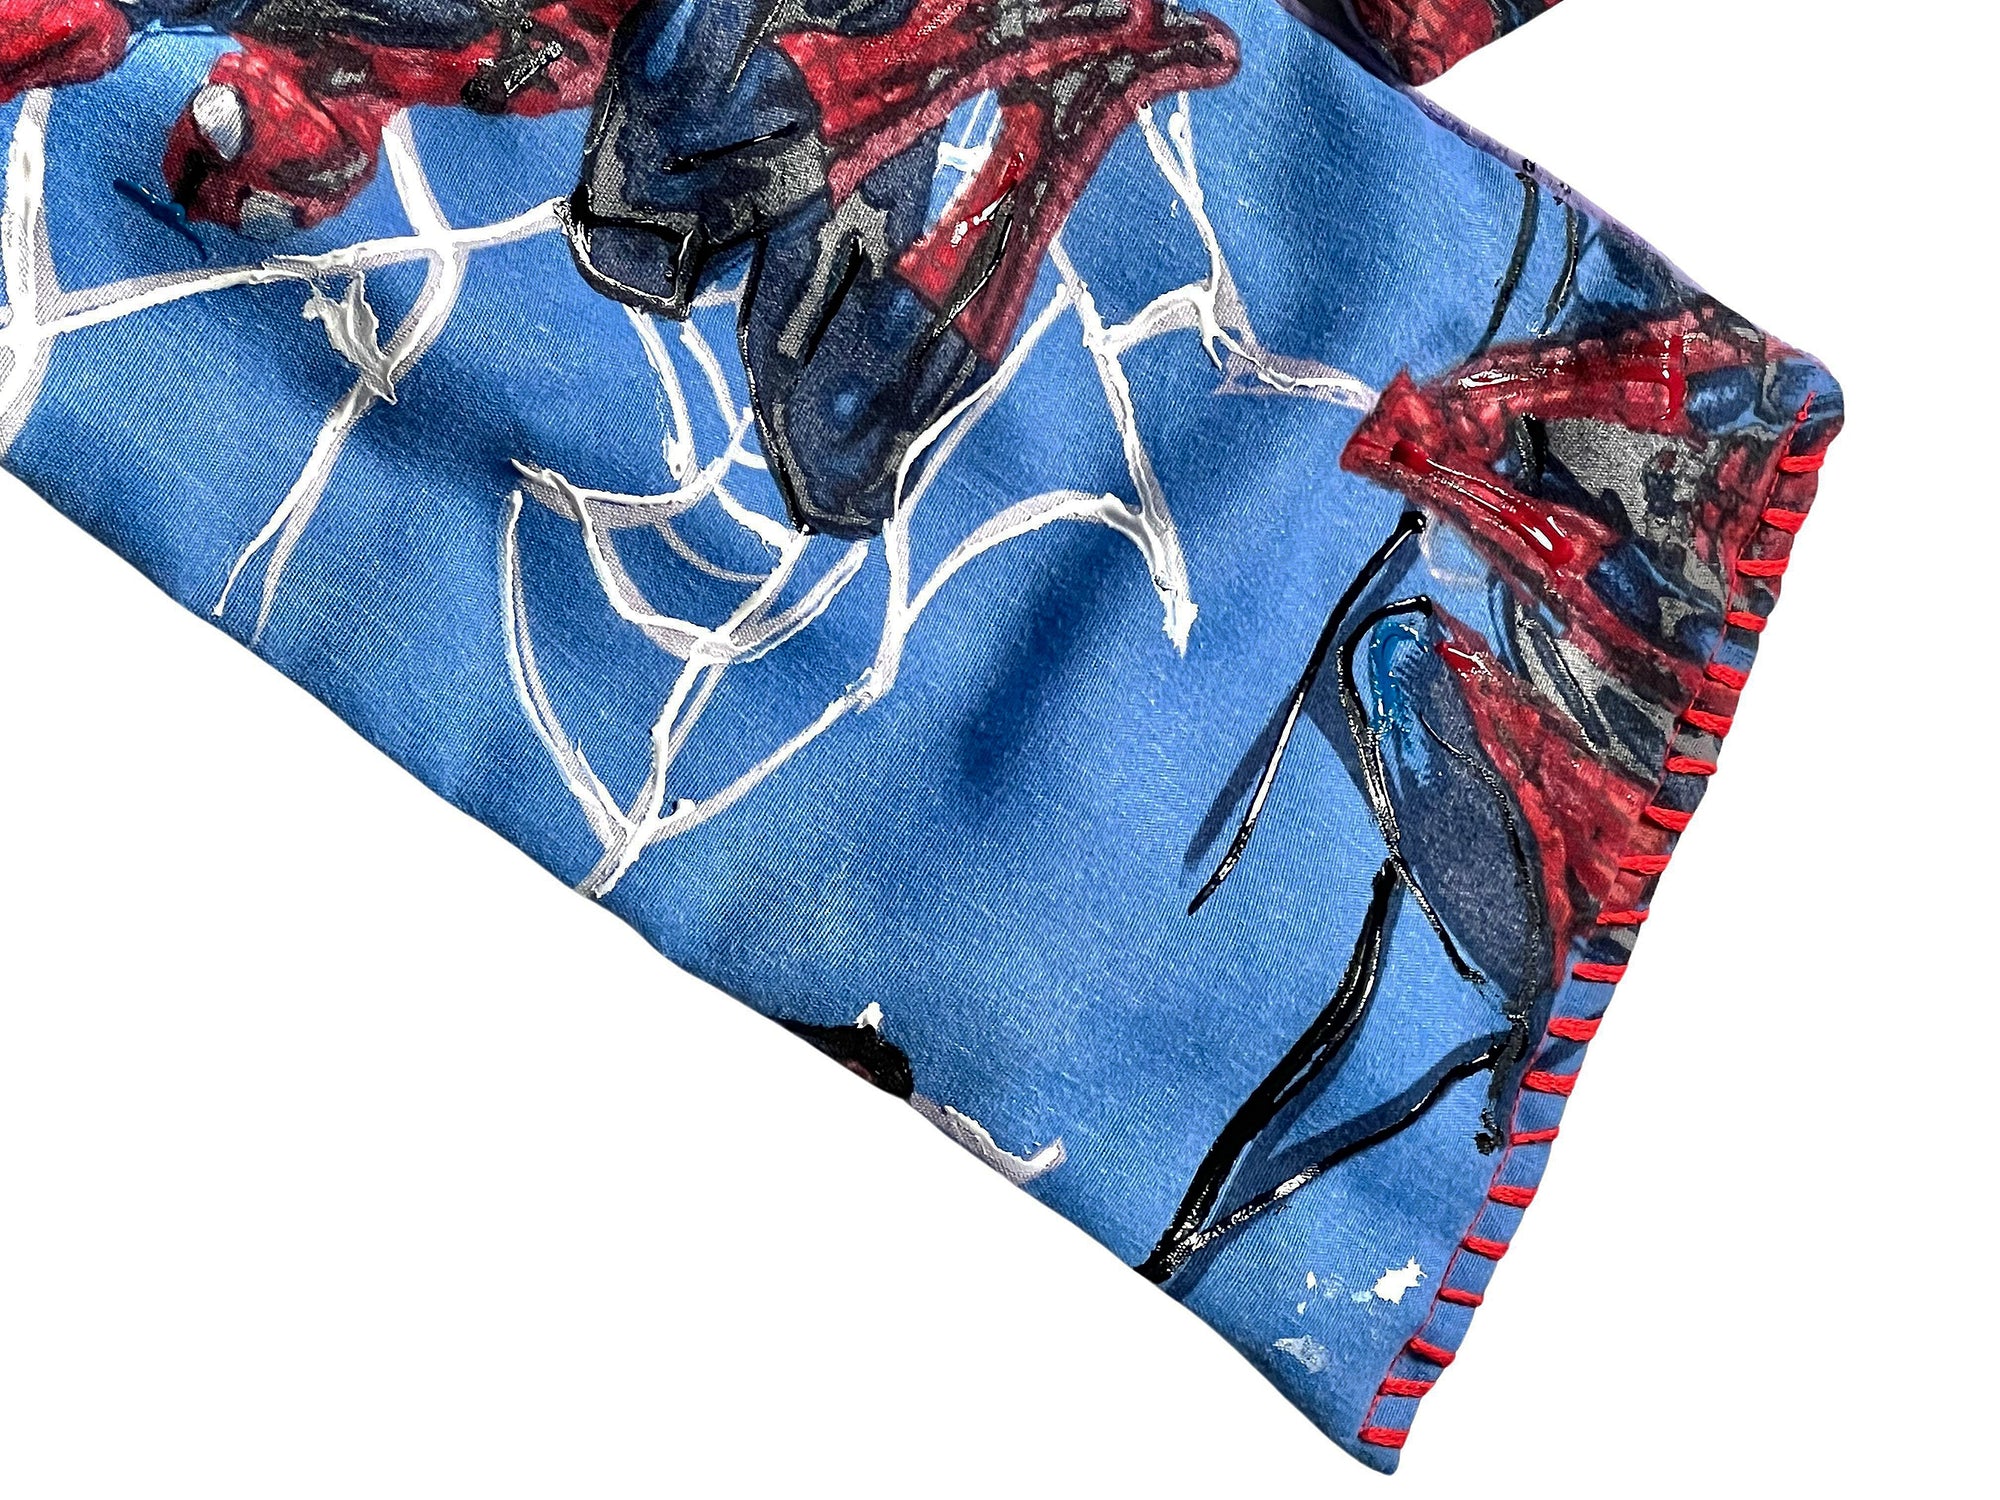 COWBOYS and DEMONS - &quot;SPIDER-MAN ACTION&quot; Scarf with Hand Applied Acrylic Accents